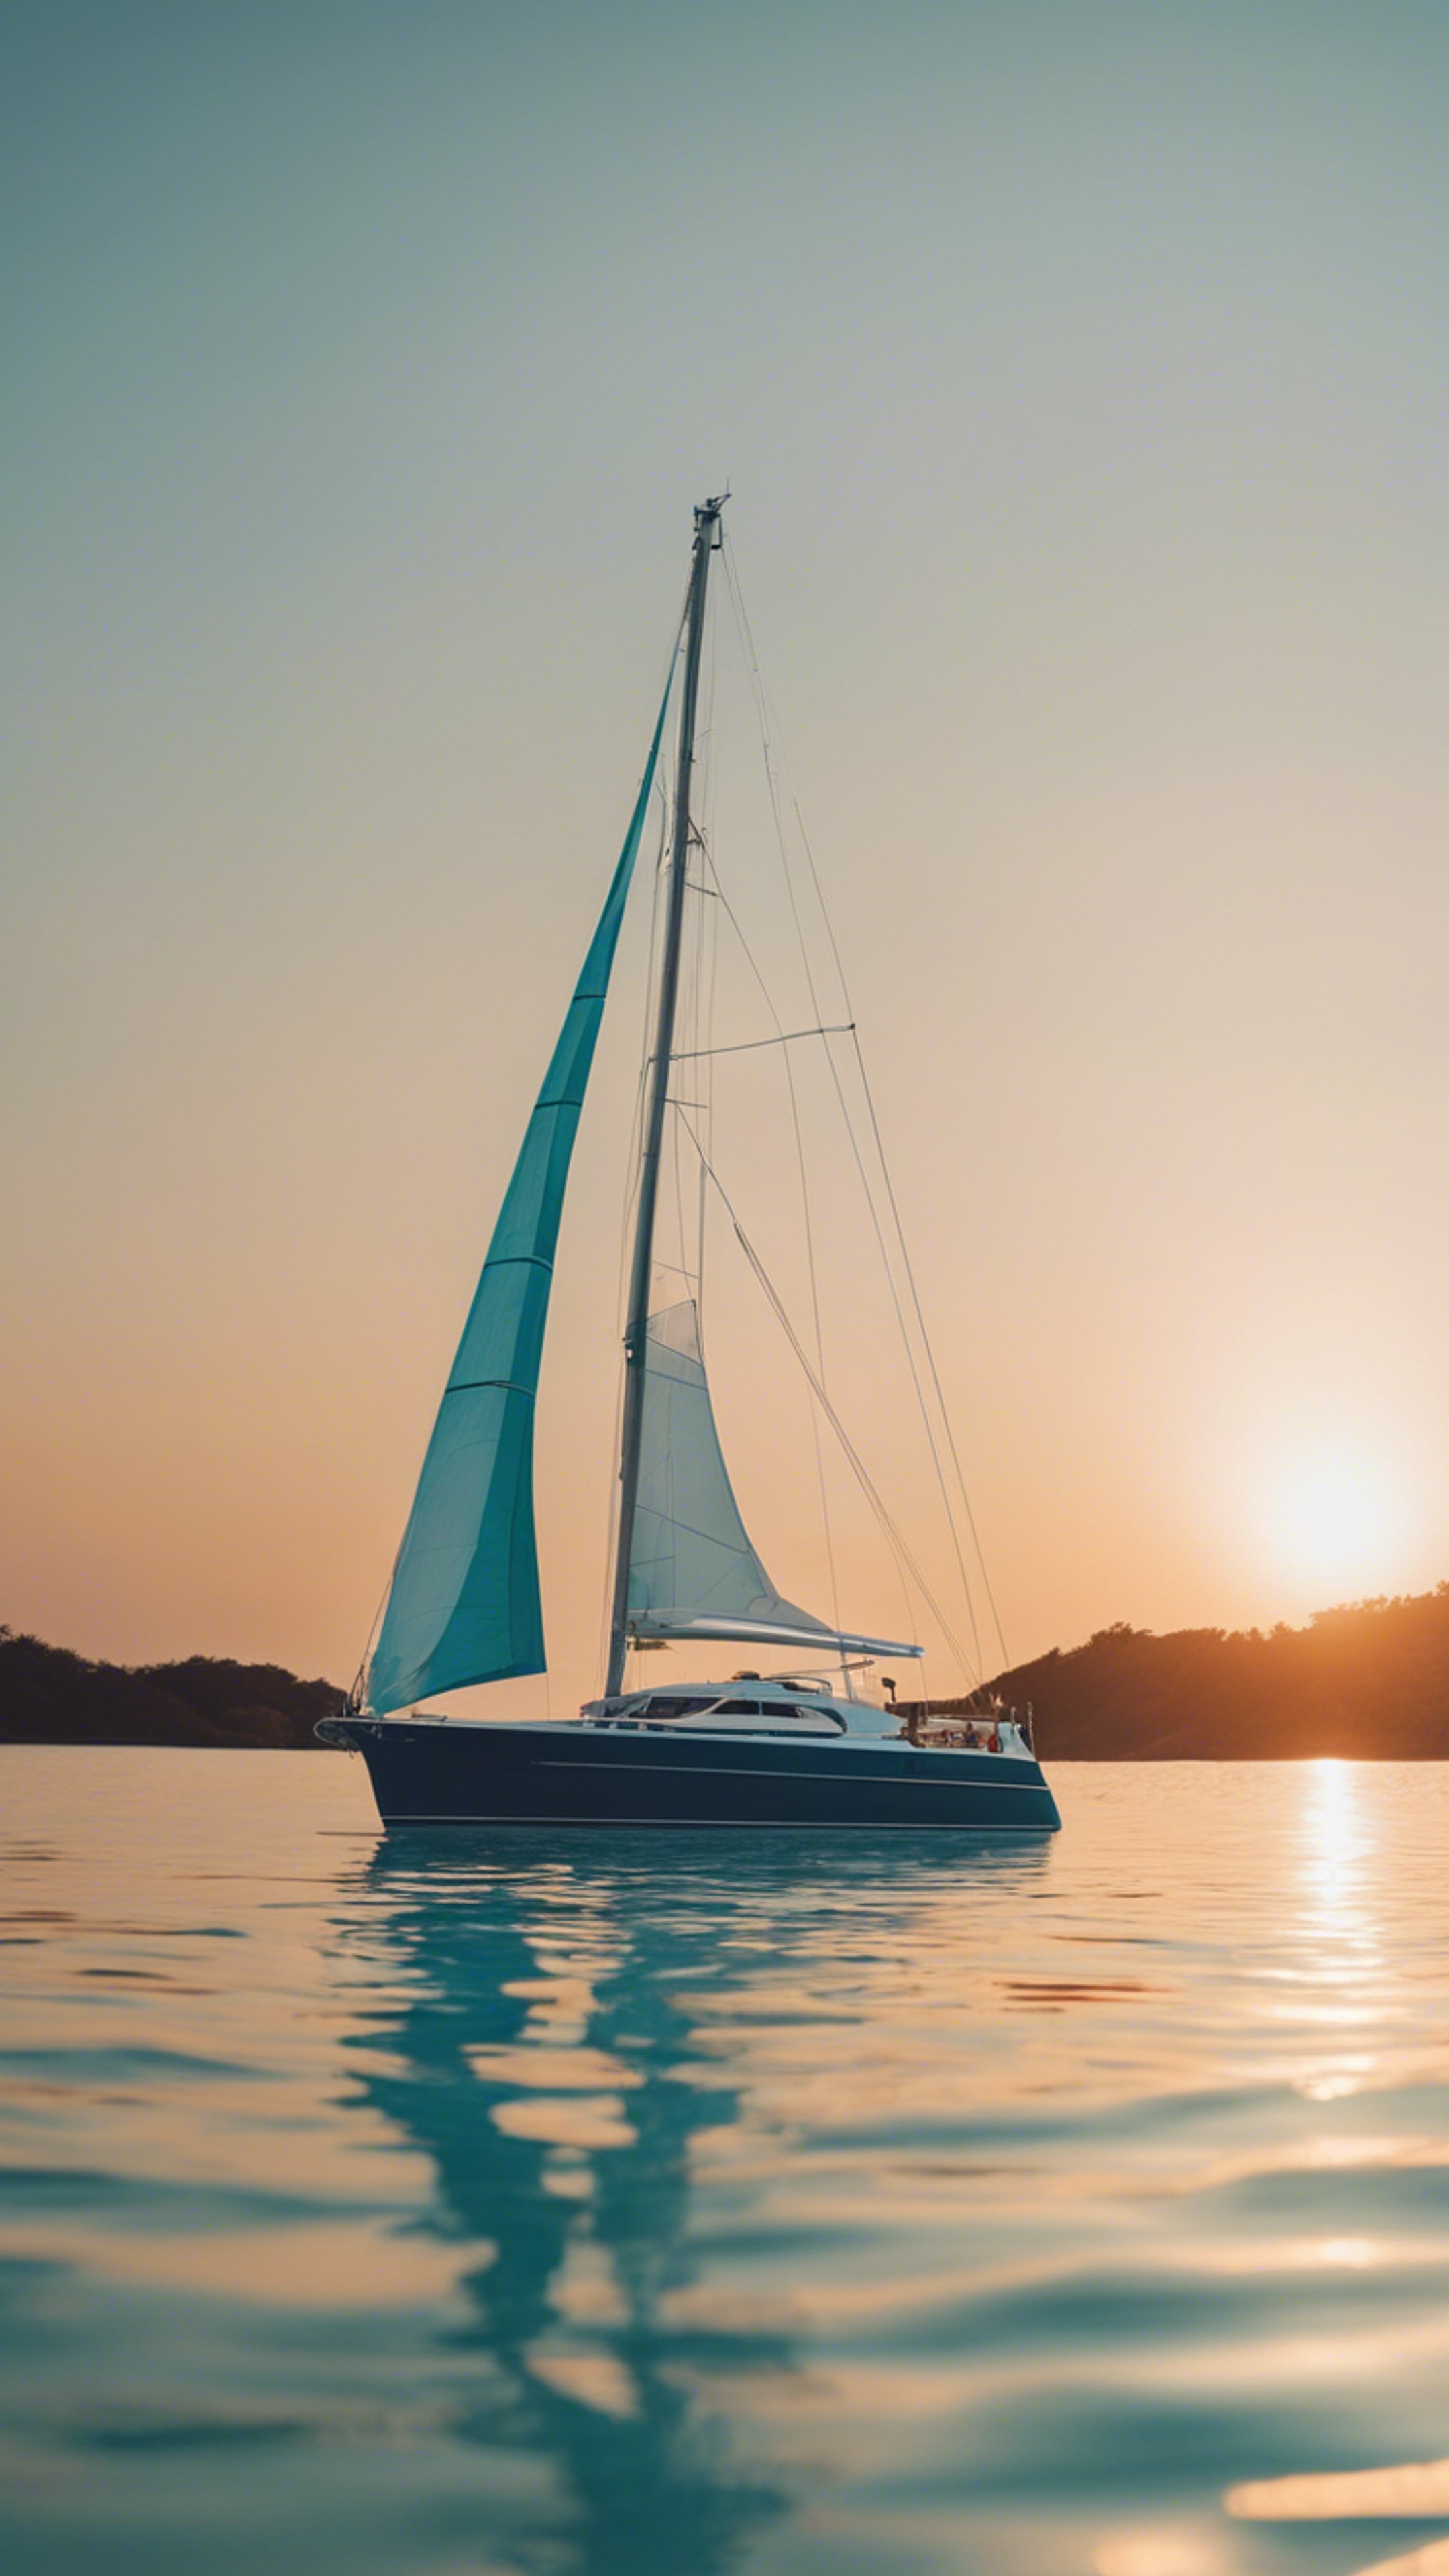 A preppy blue yacht sailing calmly on clear aquamarine waters at sunset. Fond d'écran[1bfcce9f38c64176b950]